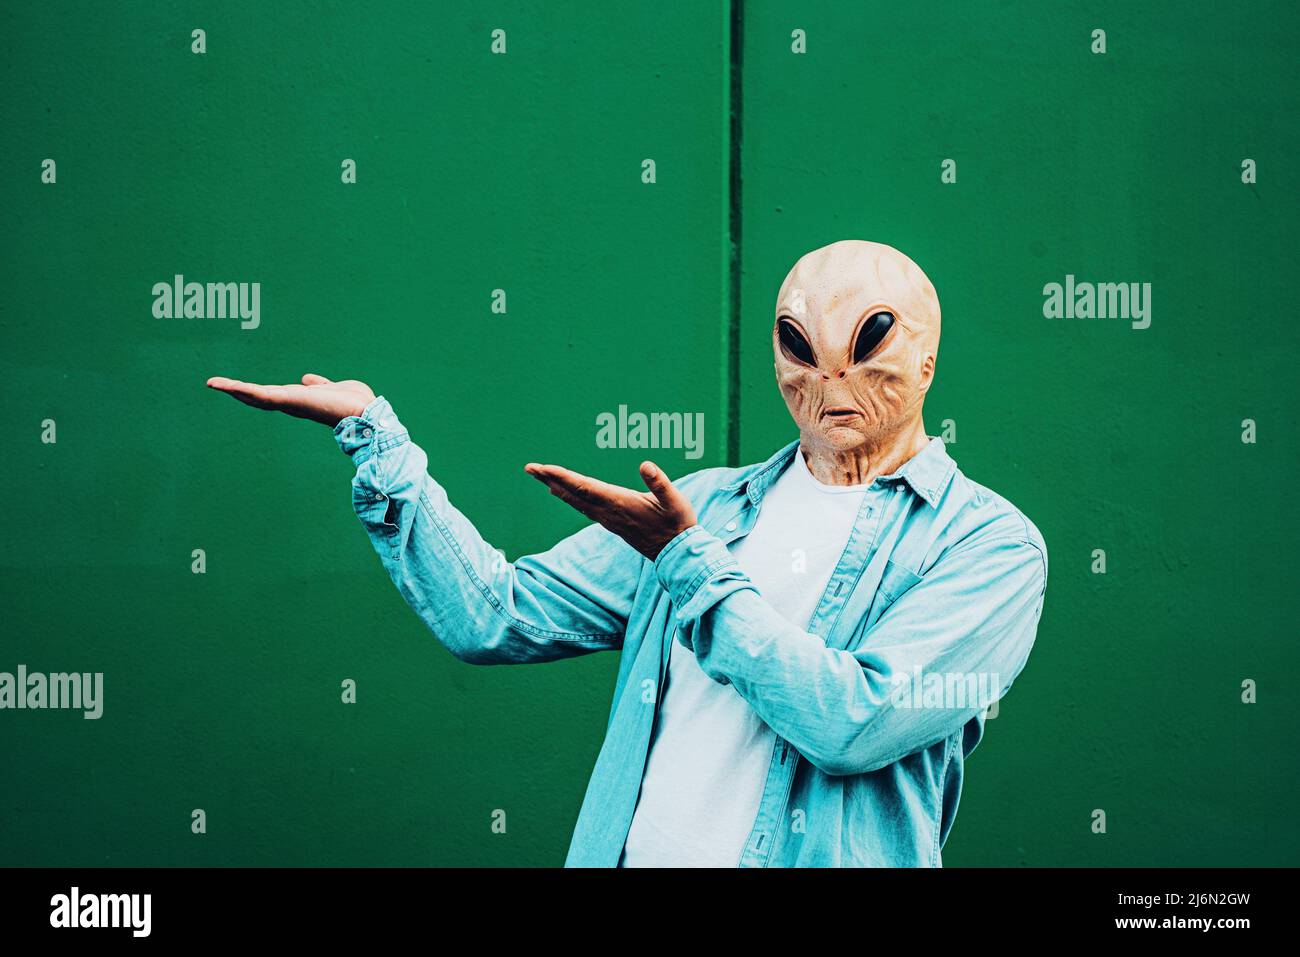 Portrait of ufo alien extraterrestrial mask with denim casual clothing like a human and green wall in background for copyspace text. Stock Photo